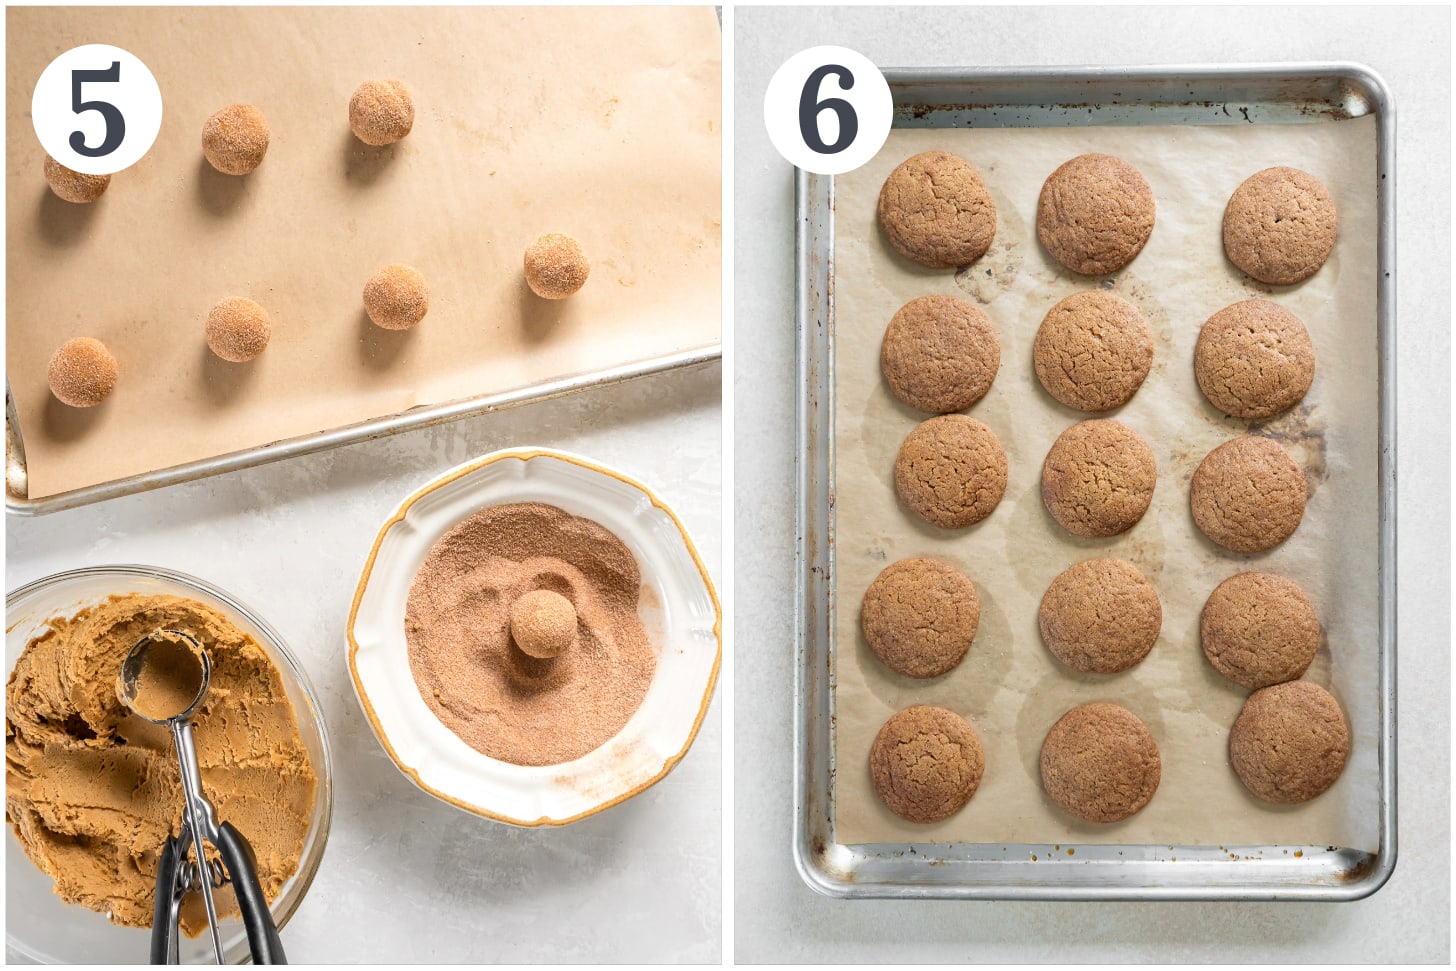 photo collage demonstrating how to roll gingerdoodle cookie dough in spiced sugar coating and bake on a baking sheet.